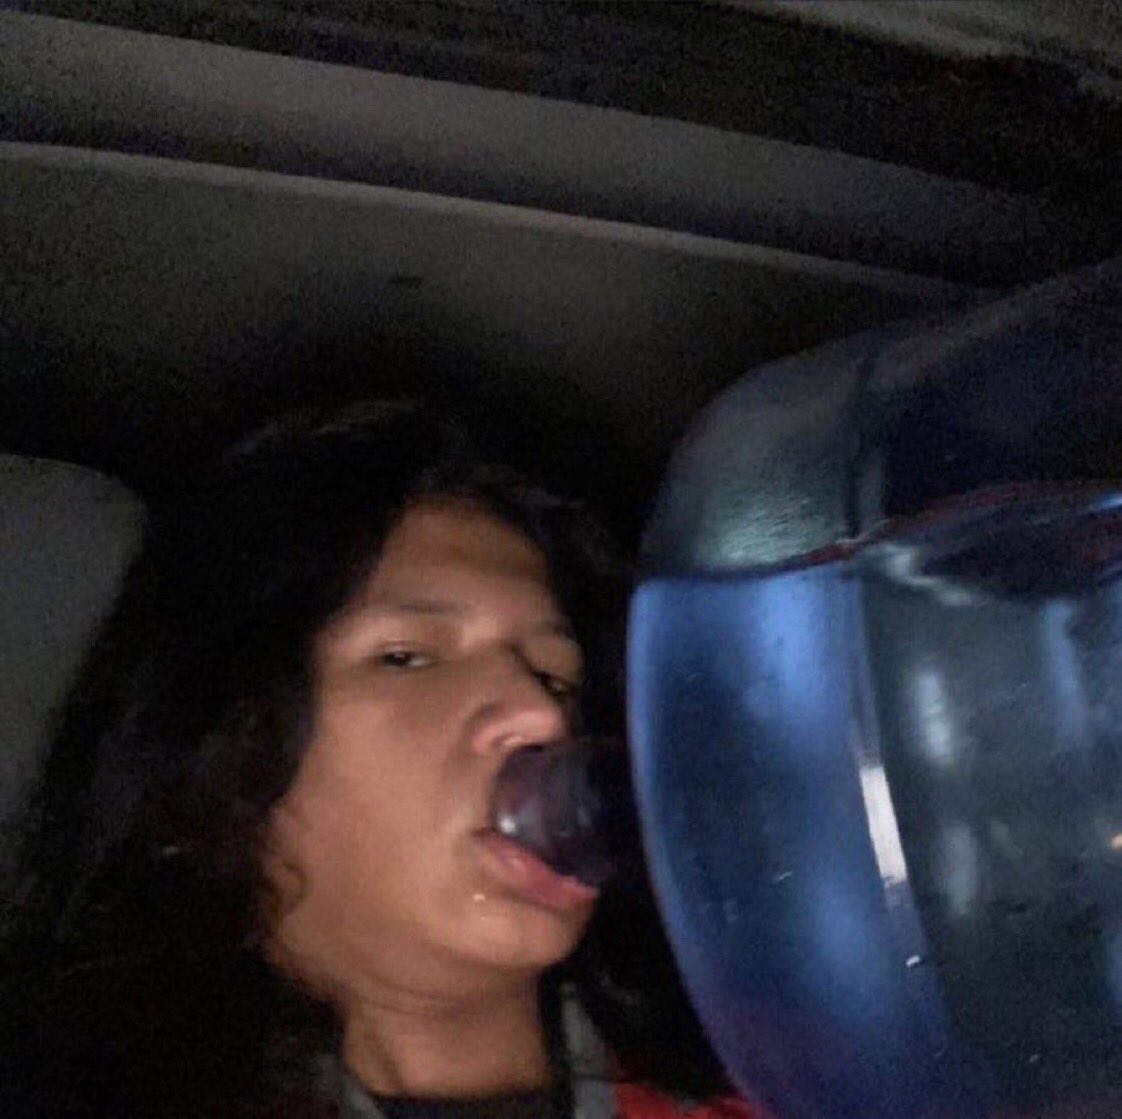 me hydrating myself at 3am: